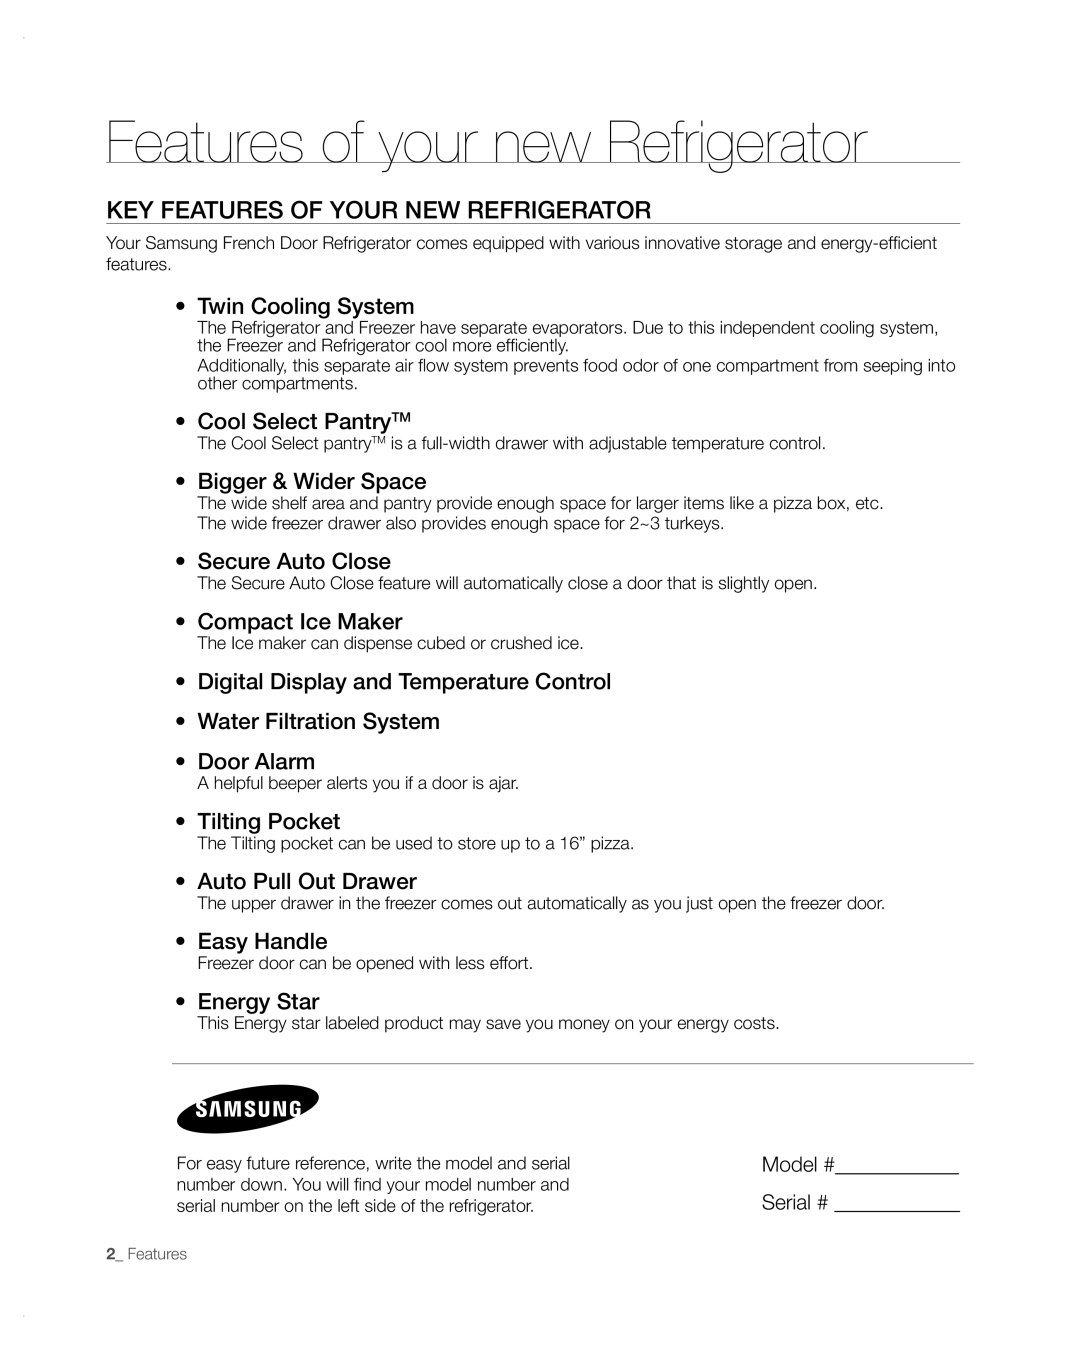 Samsung RFG297AA user manual Features of your new Refrigerator, Key features of your new refrigerator 